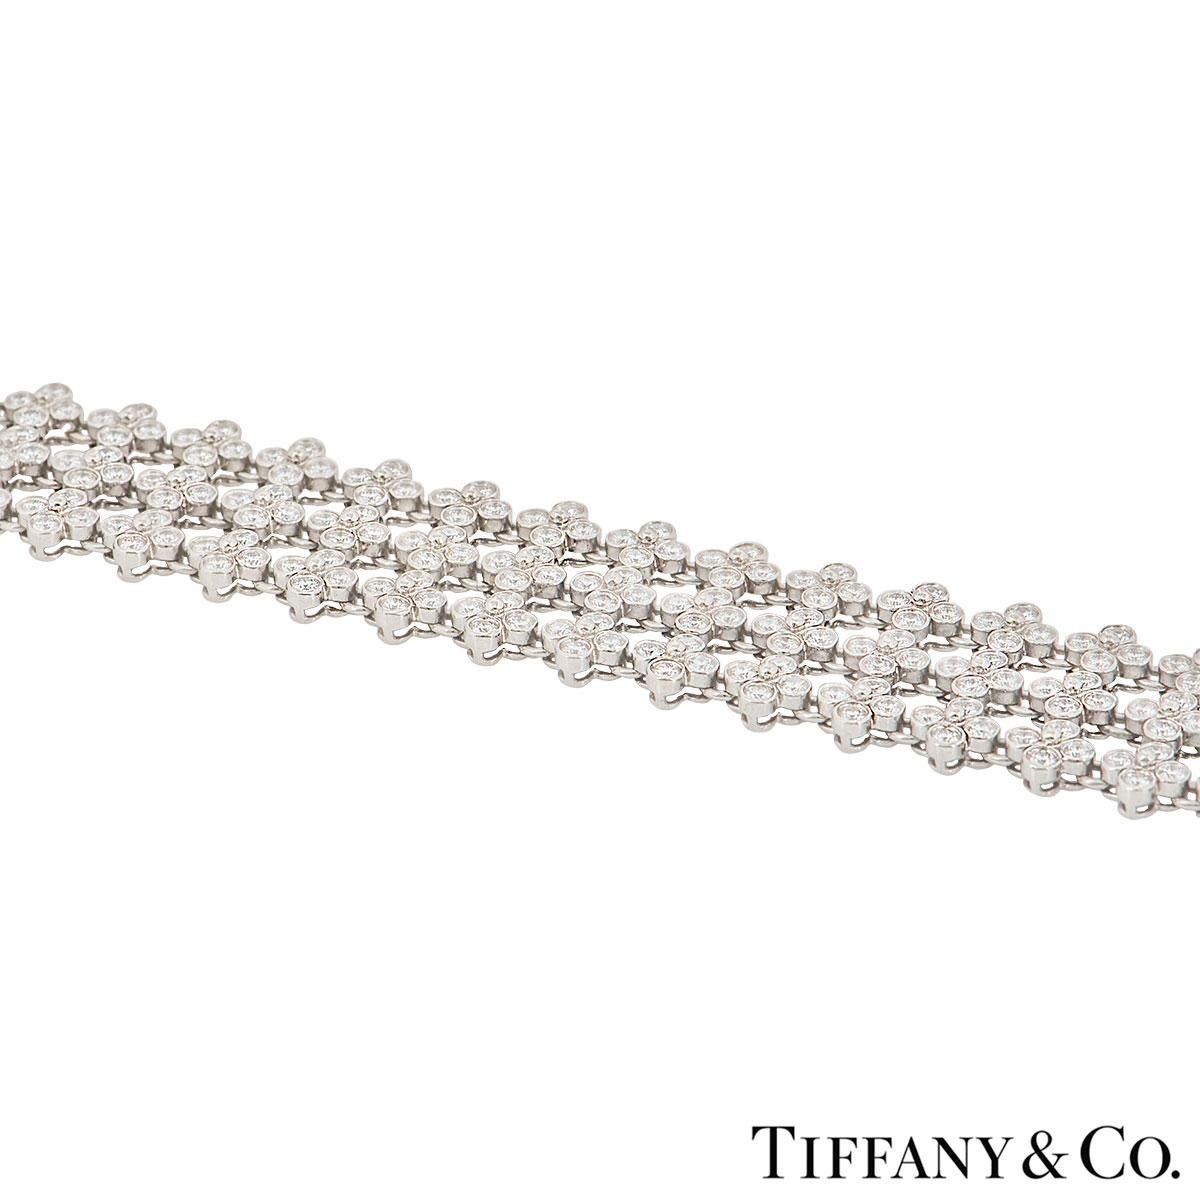 A beautiful bracelet by Tiffany & Co. from the Lace collection. The bracelet features 3 rows of floral motifs, with a total of 336 round brilliant cut diamonds in a rubover setting. The diamond have a total weight of approximately 7.00ct. The